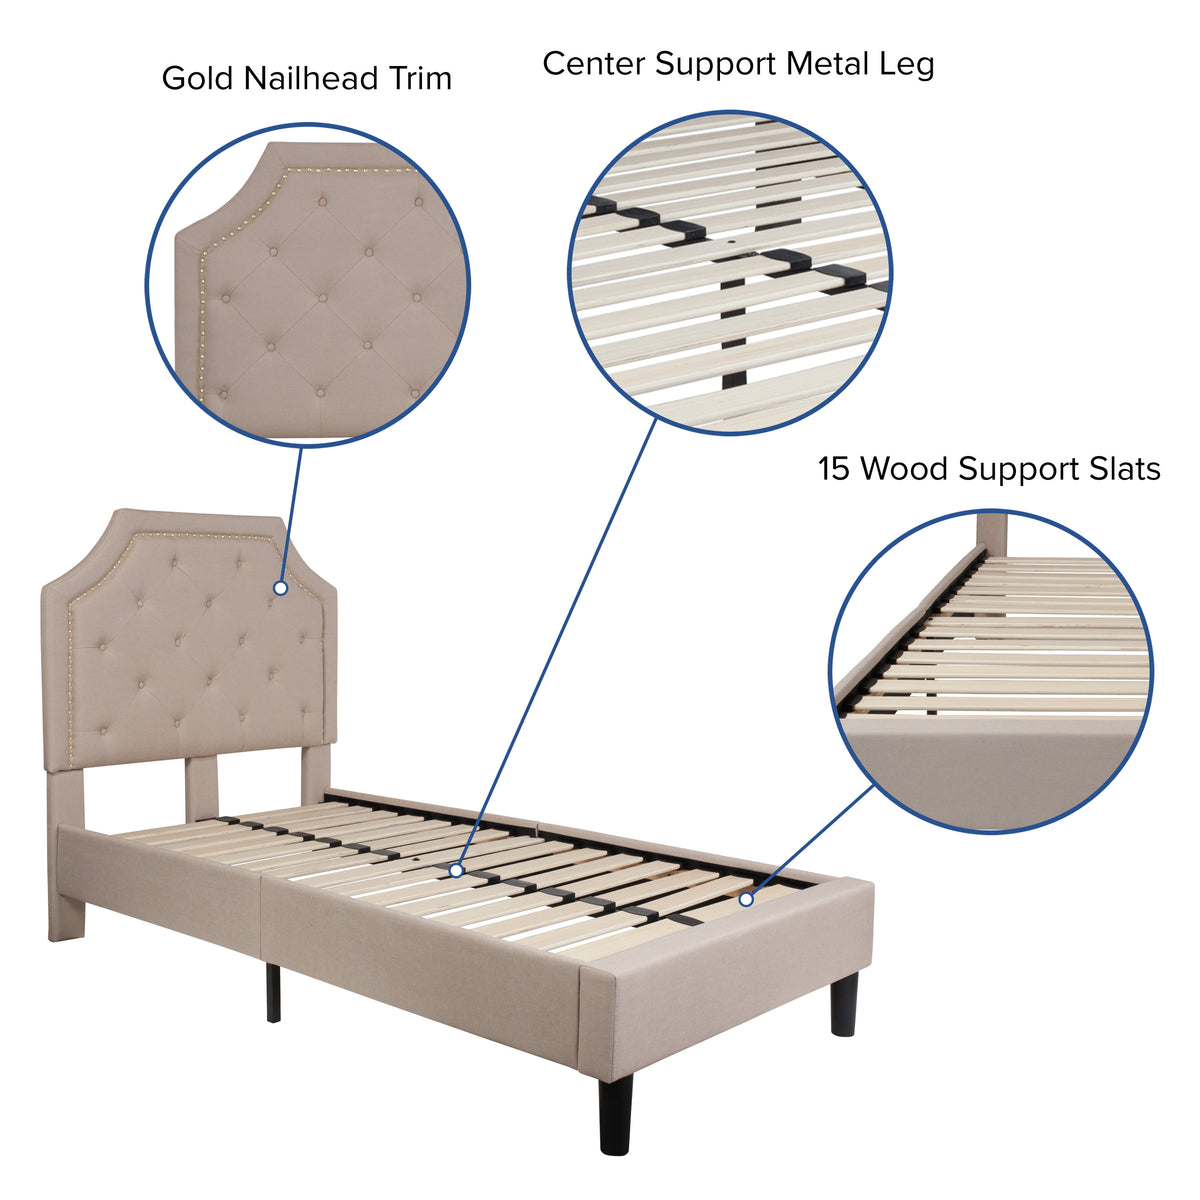 Beige,Twin |#| Twin Tufted Platform Bed in Beige Fabric with 10 Inch Pocket Spring Mattress